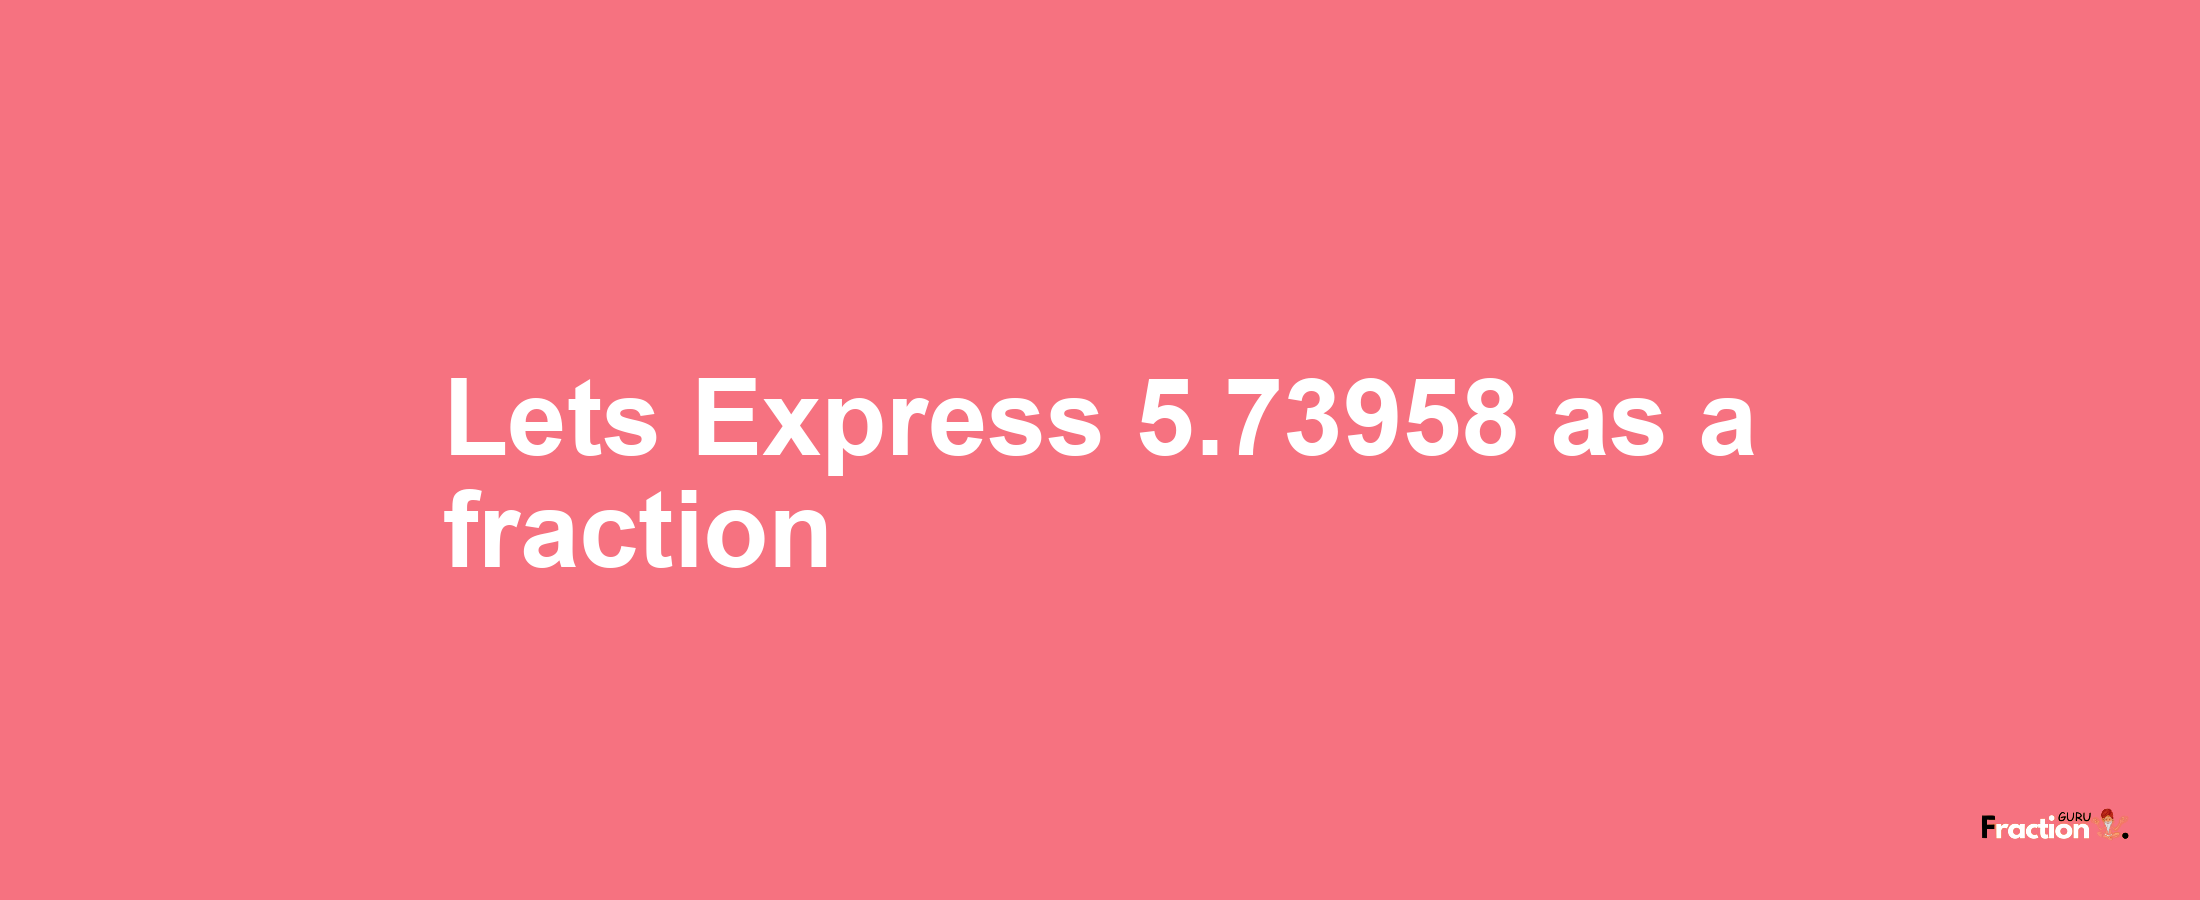 Lets Express 5.73958 as afraction